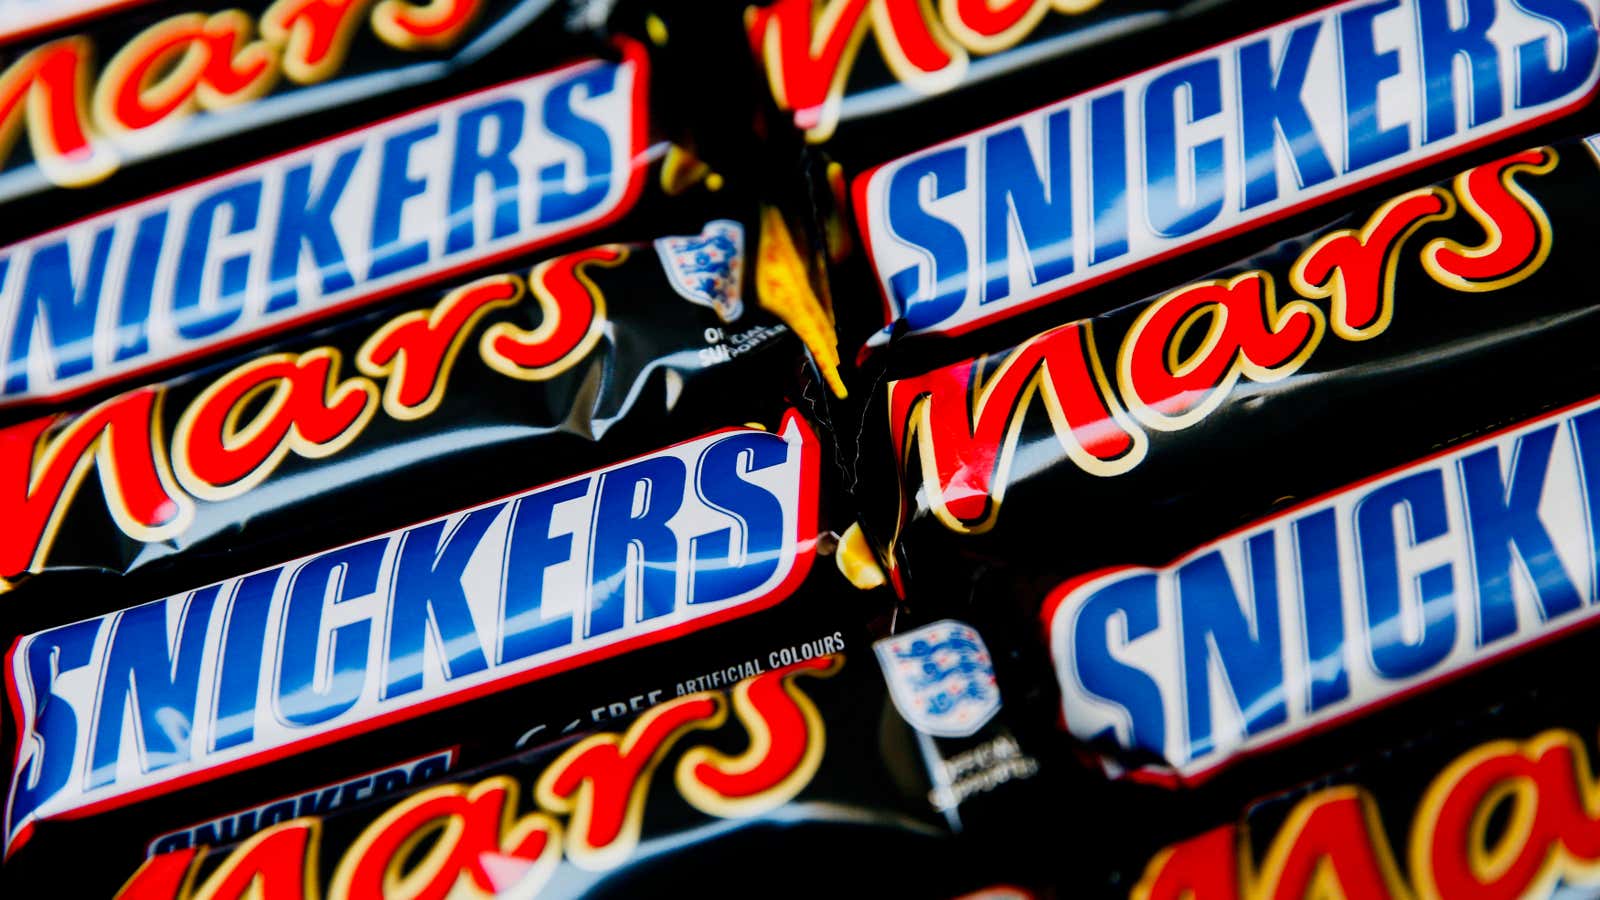 Mars candy bar labels don't have to disclose the bitter truth